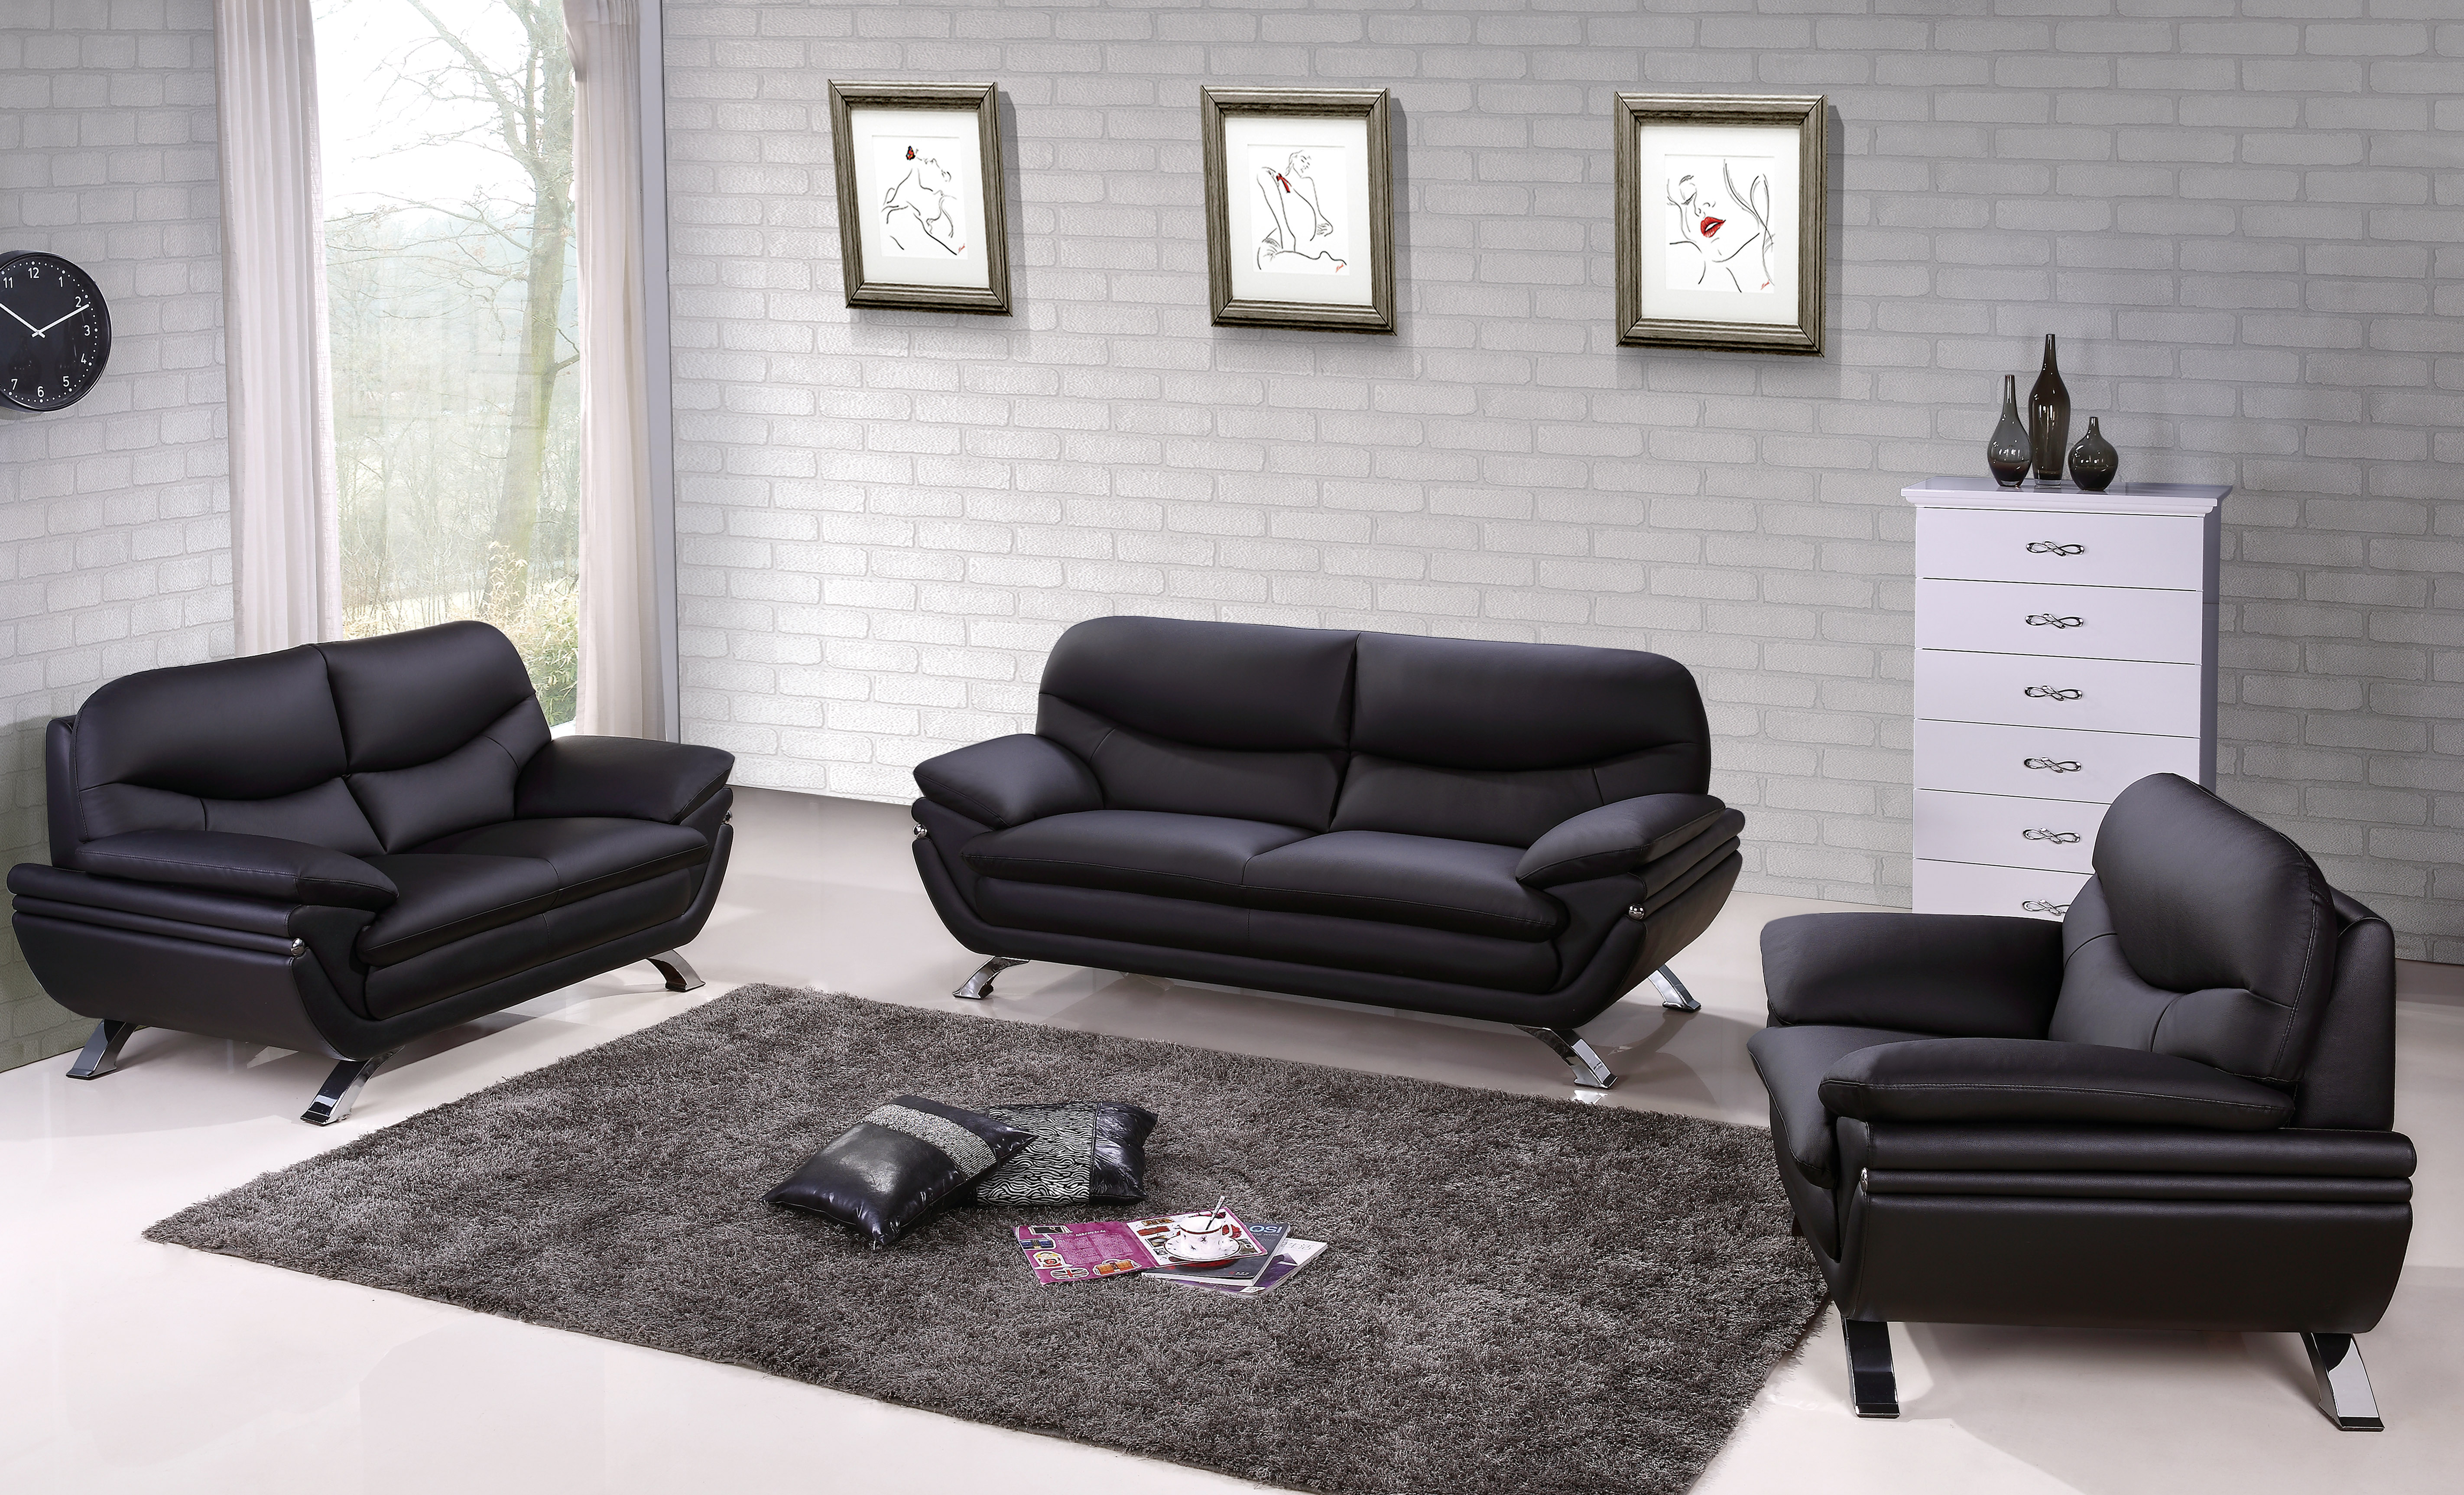 living room with sofa and 2 leather recliners